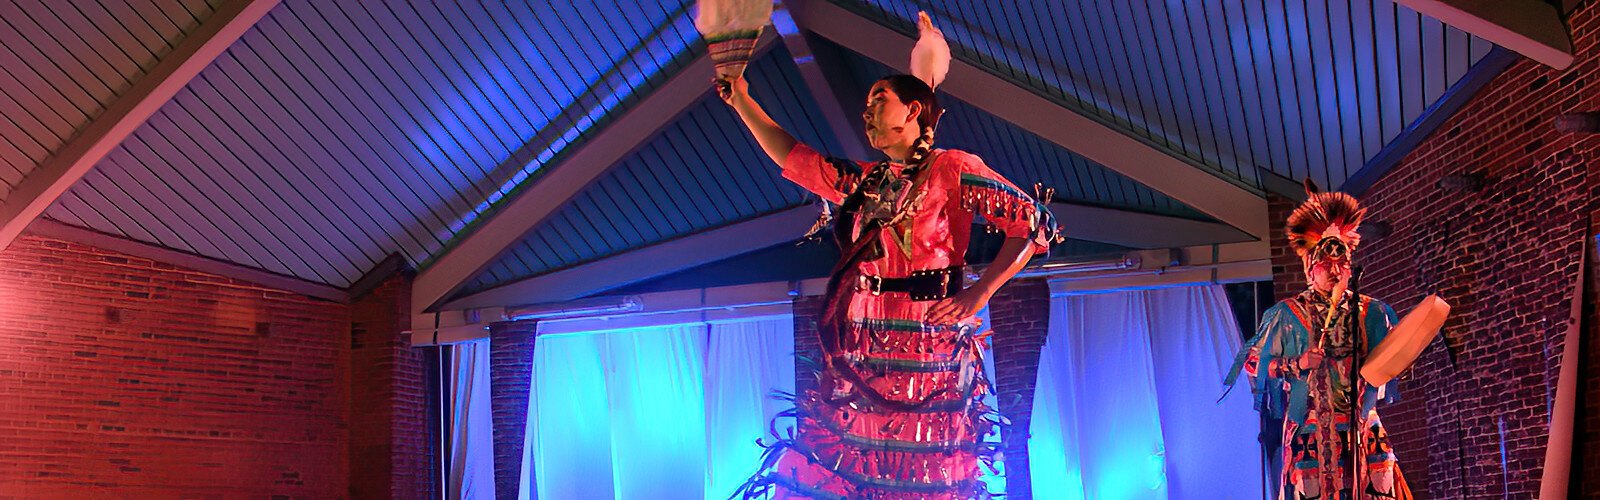 CreeAtive Native American performers Dakota Shaw and Otter Oliver of the Cree and Dakota nations, perform the “Jingle Dress Dance” on stage at the Tampa City Ballet's first Dance Now festival.